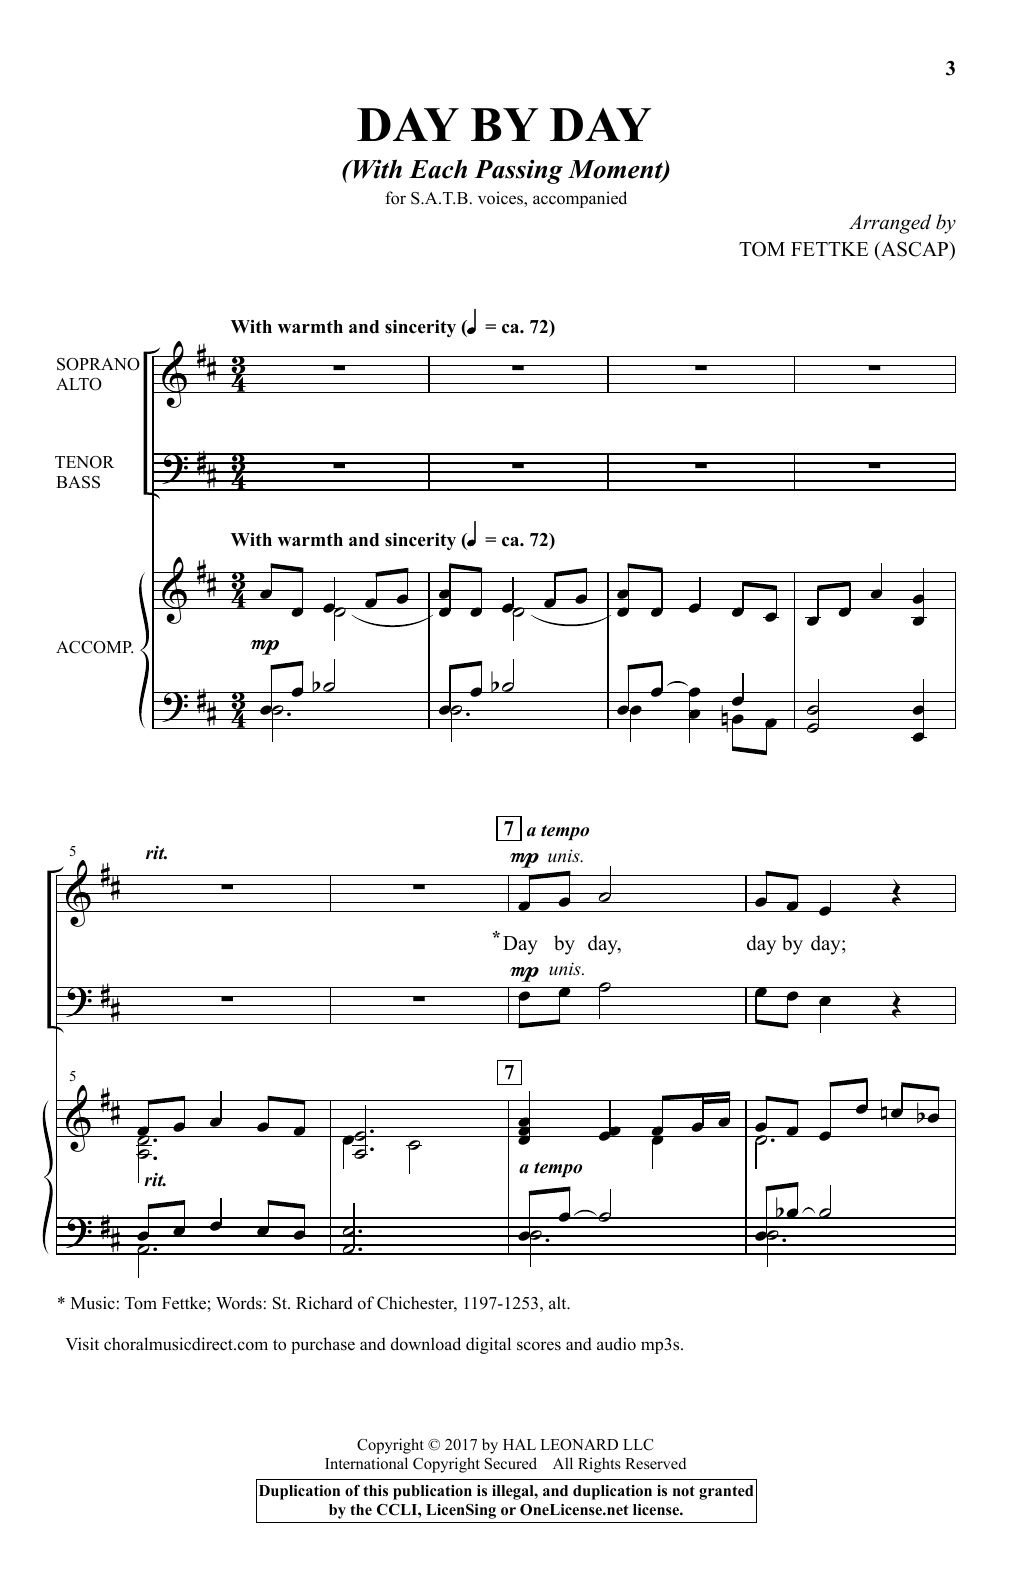 Download Tom Fettke Day By Day (With Each Passing Moment) Sheet Music